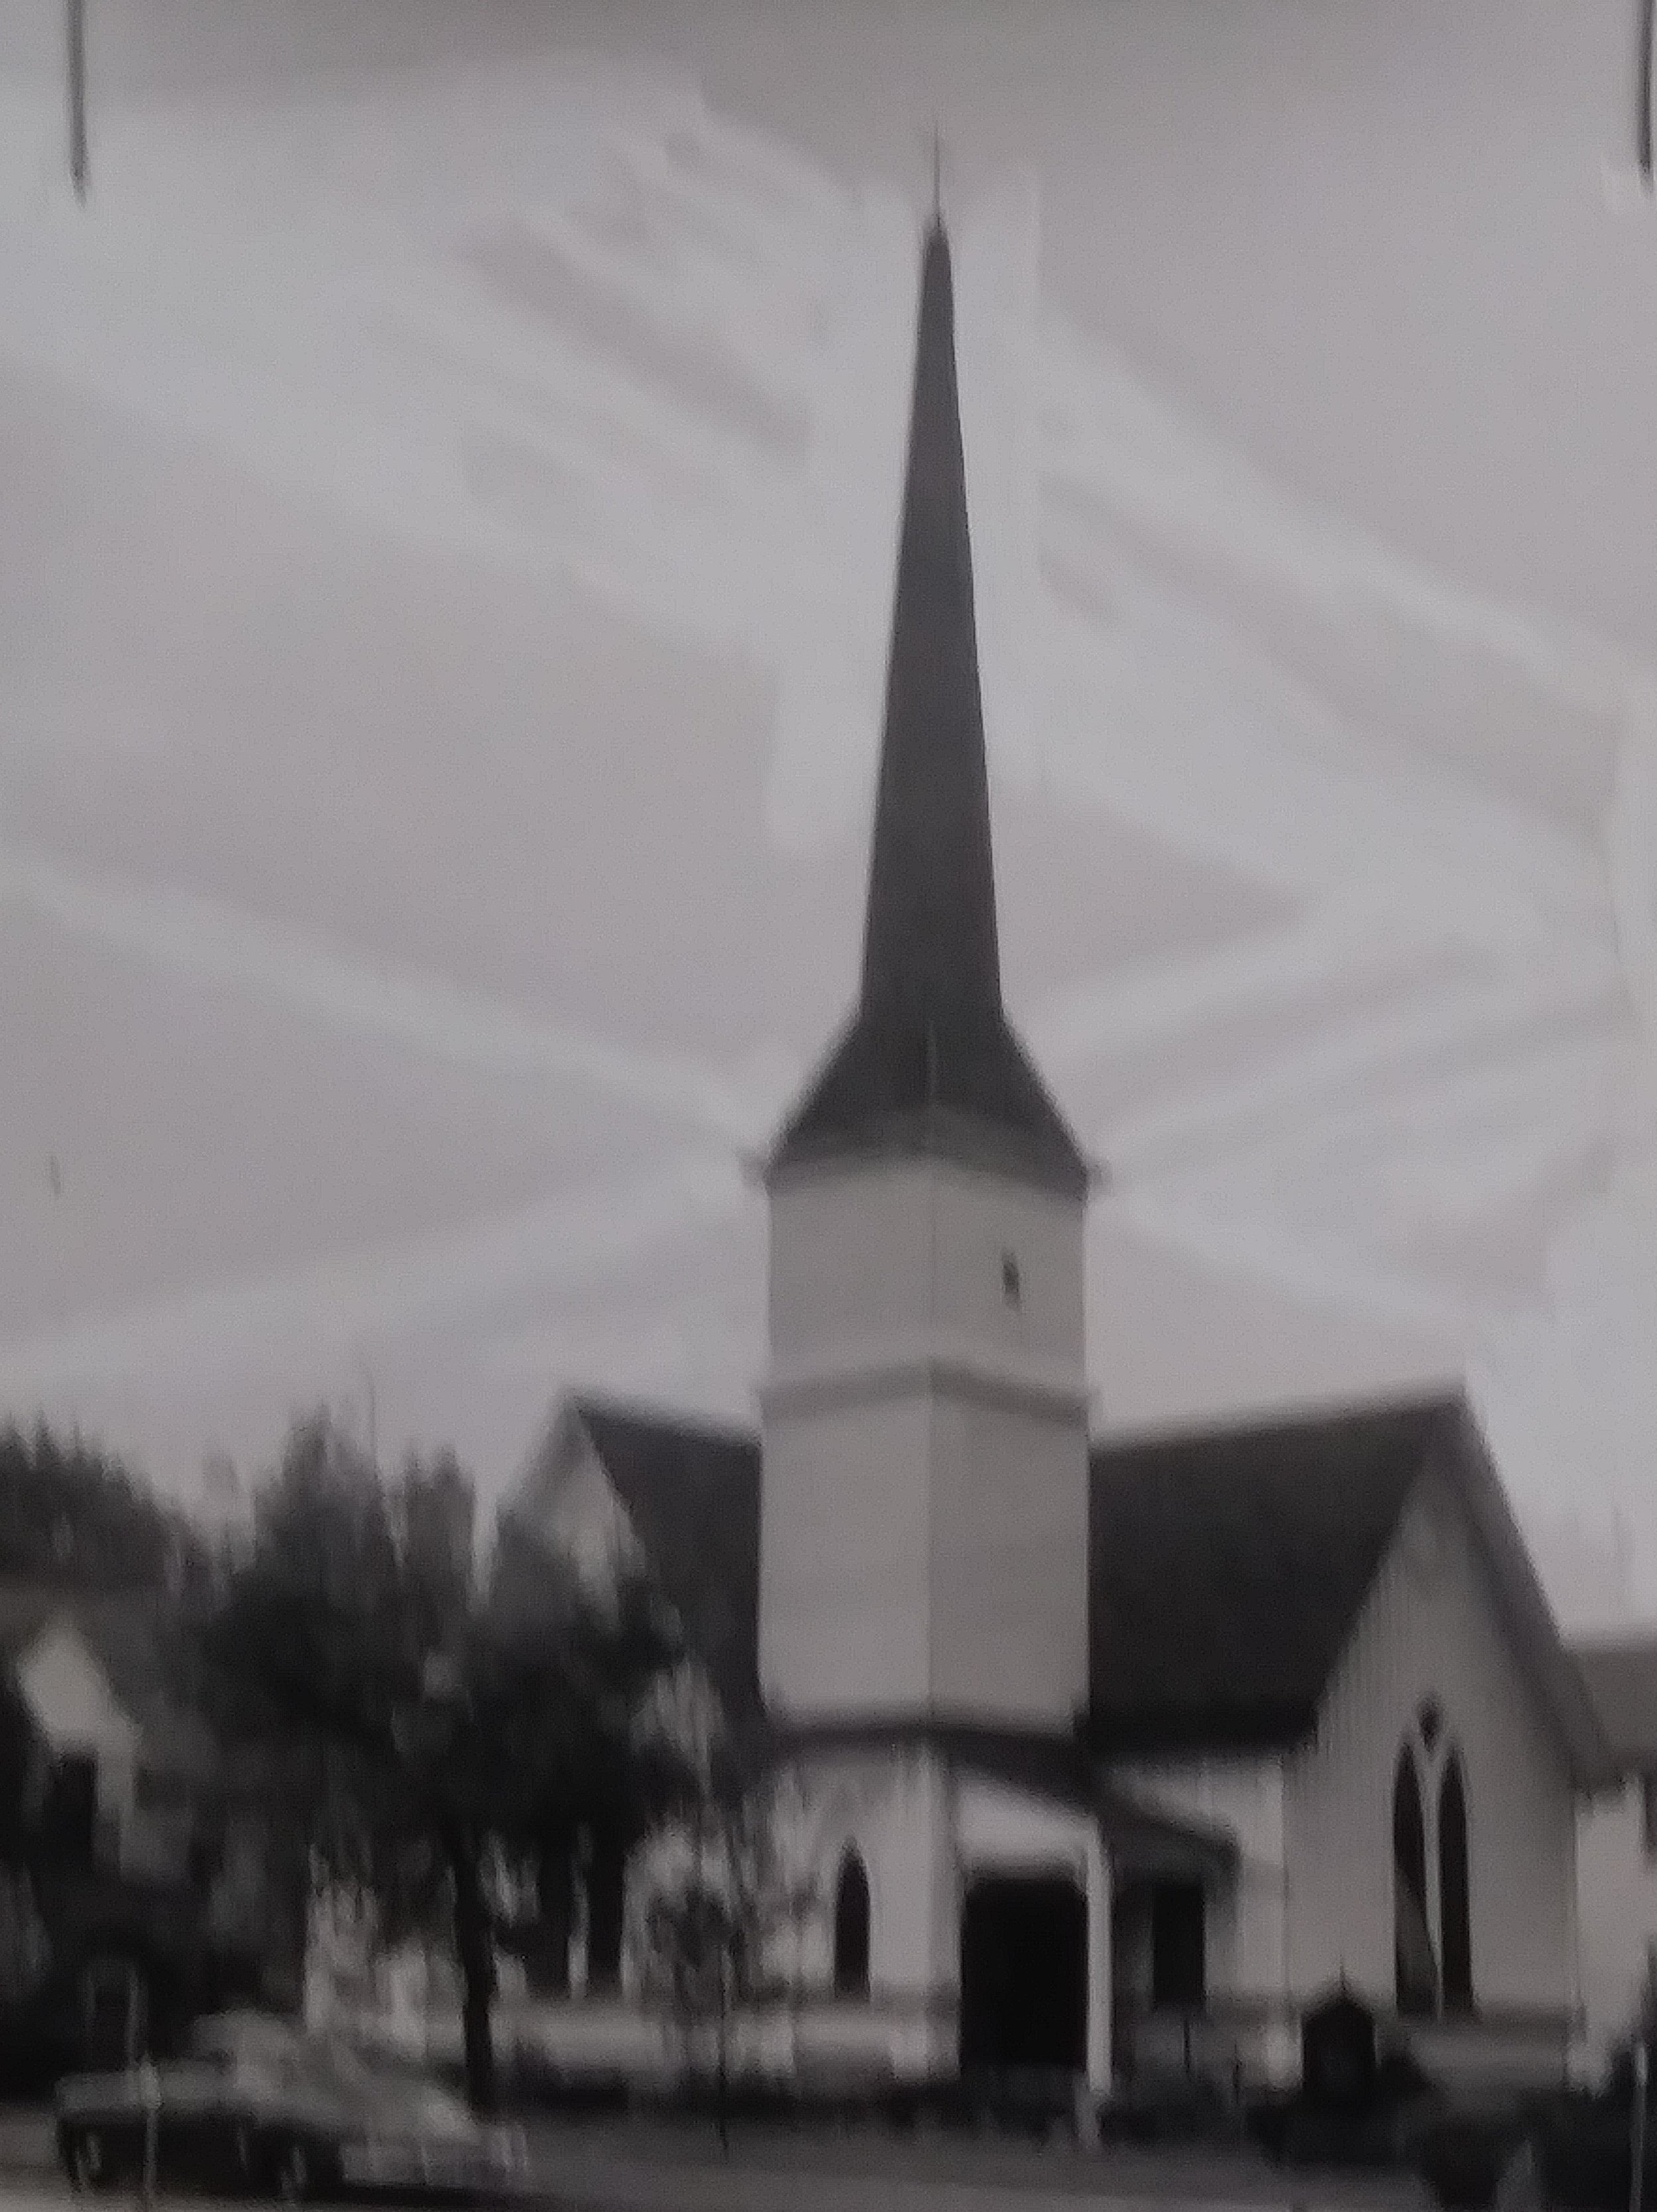  Original Grace Church at its second location at Washington Avenue and Elm Street n Linden. 